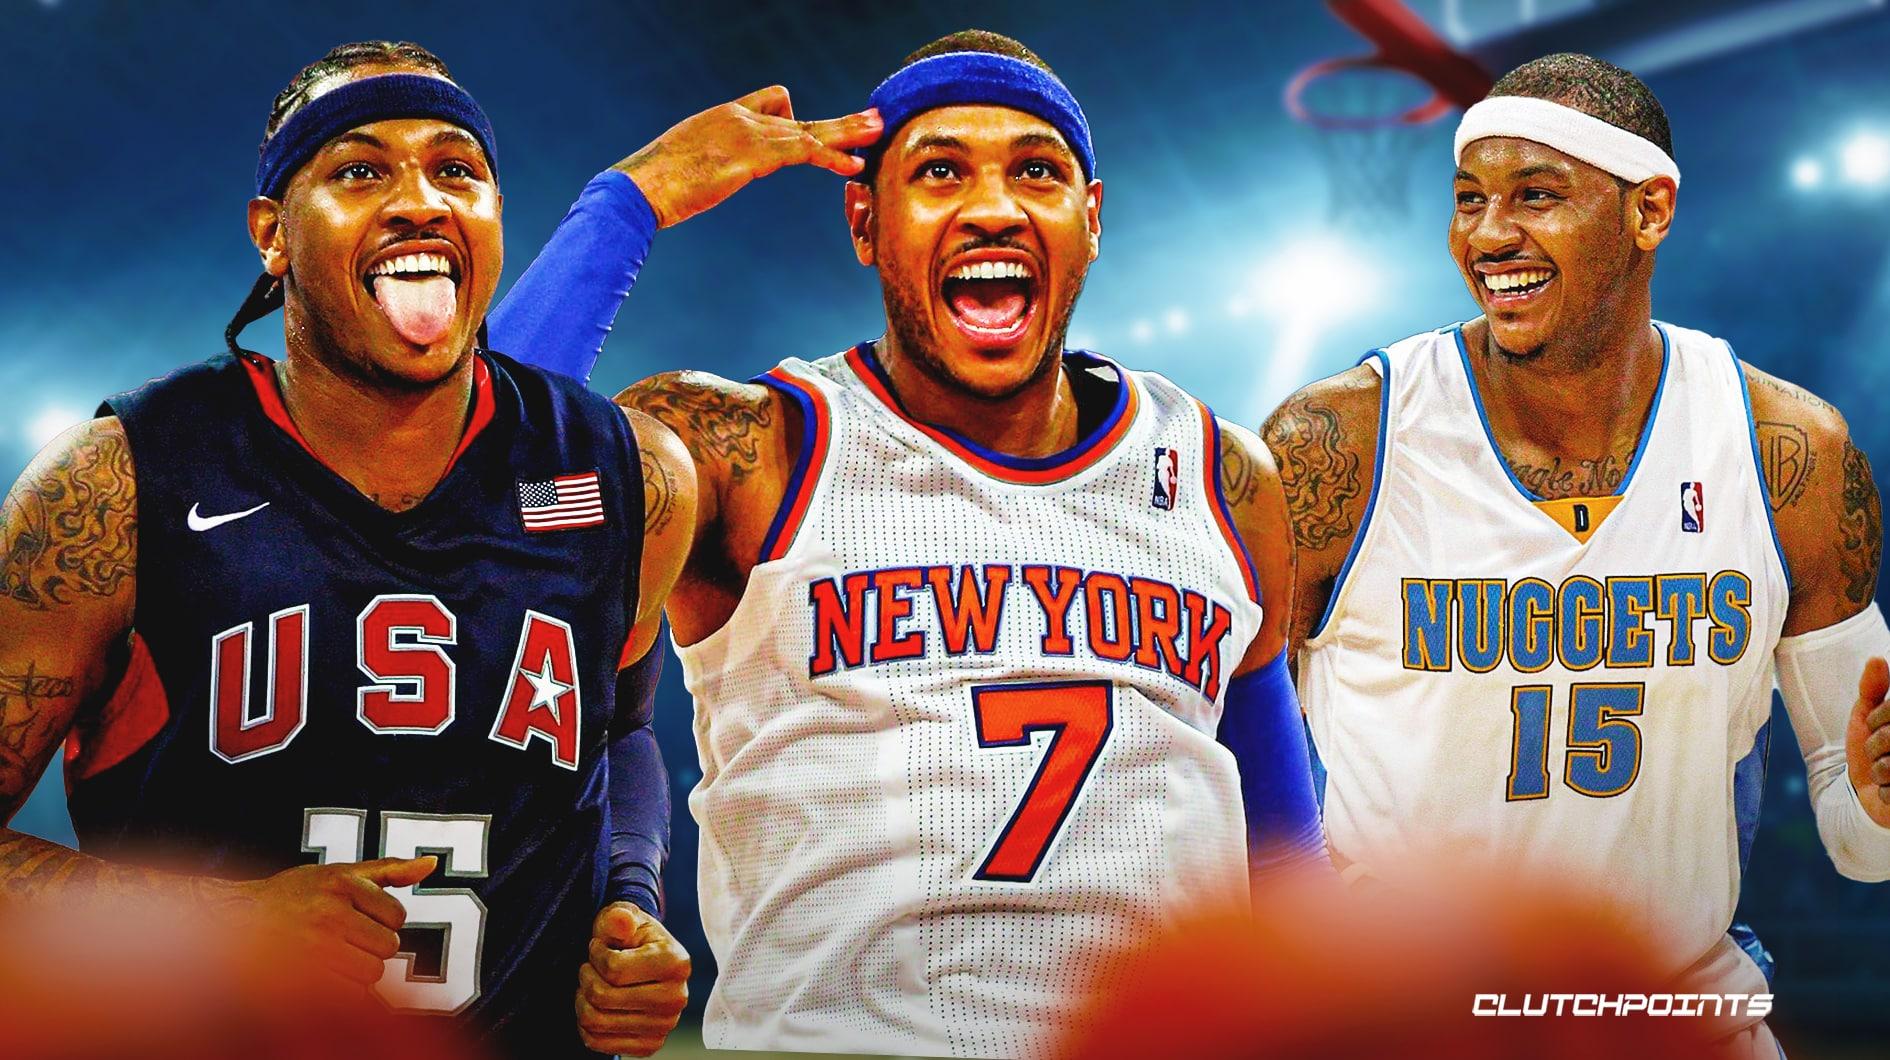 Carmelo Anthony 'at peace' with not winning NBA championship: 'I